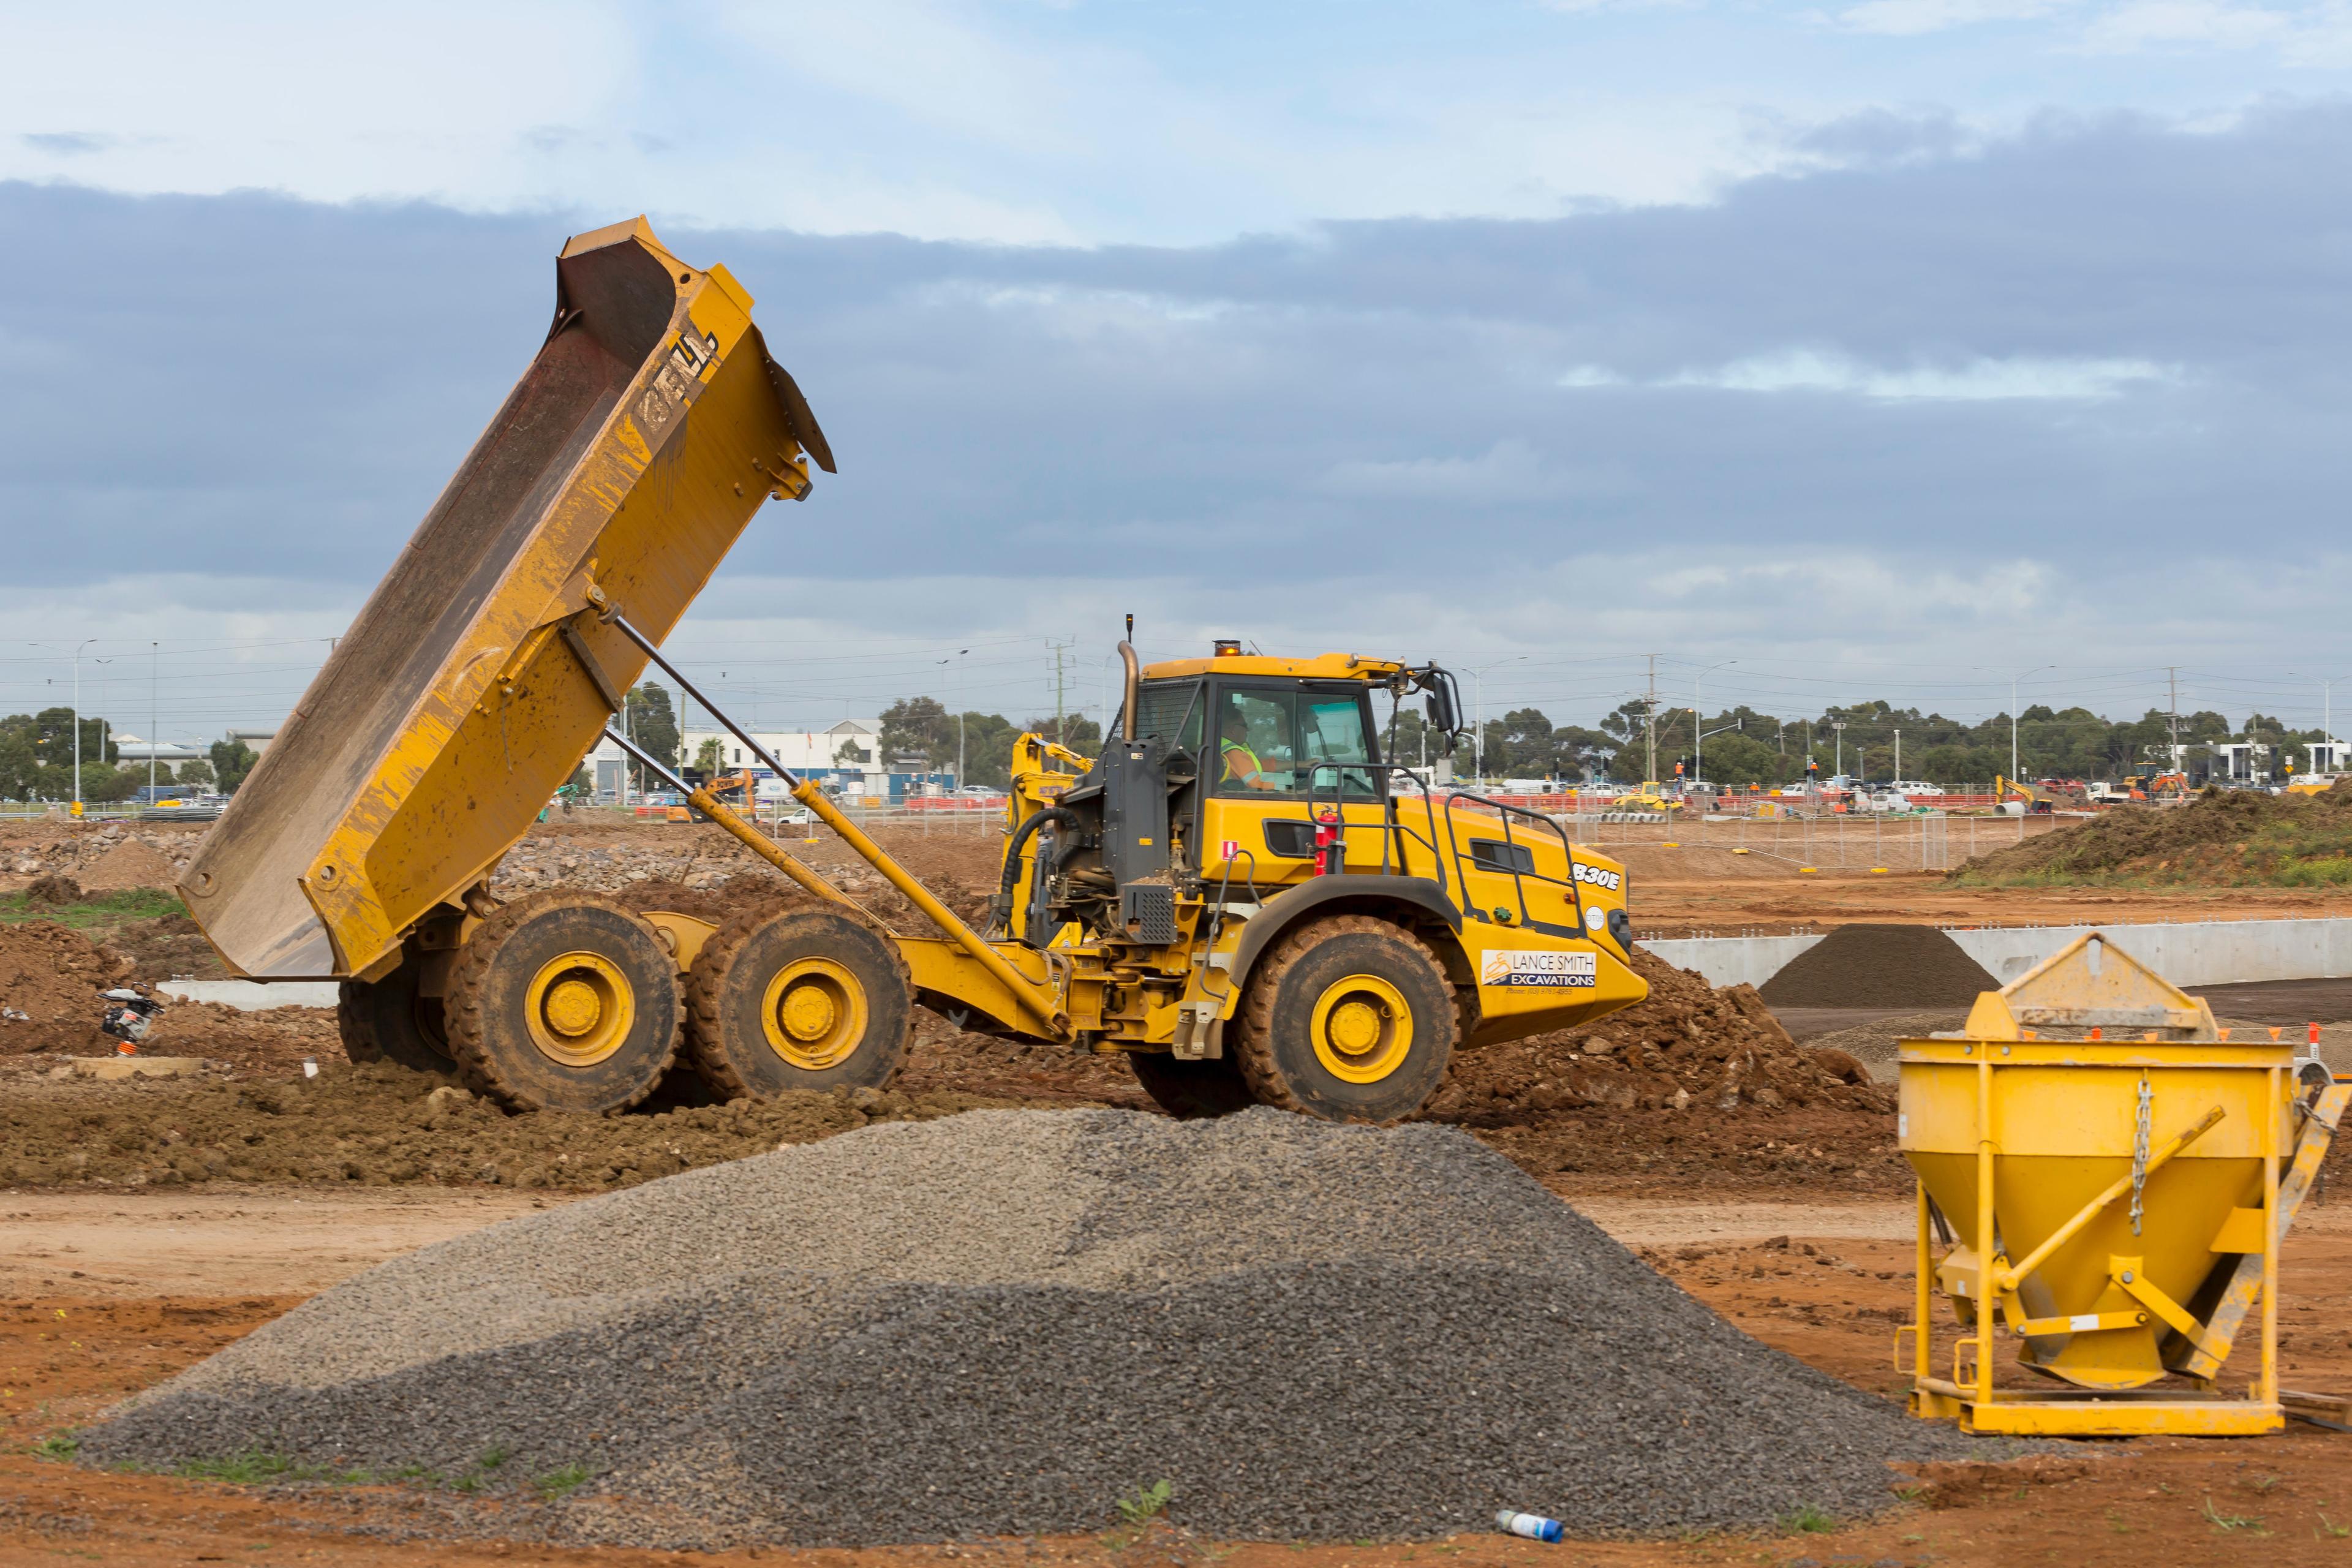 What makes a great heavy equipment operator